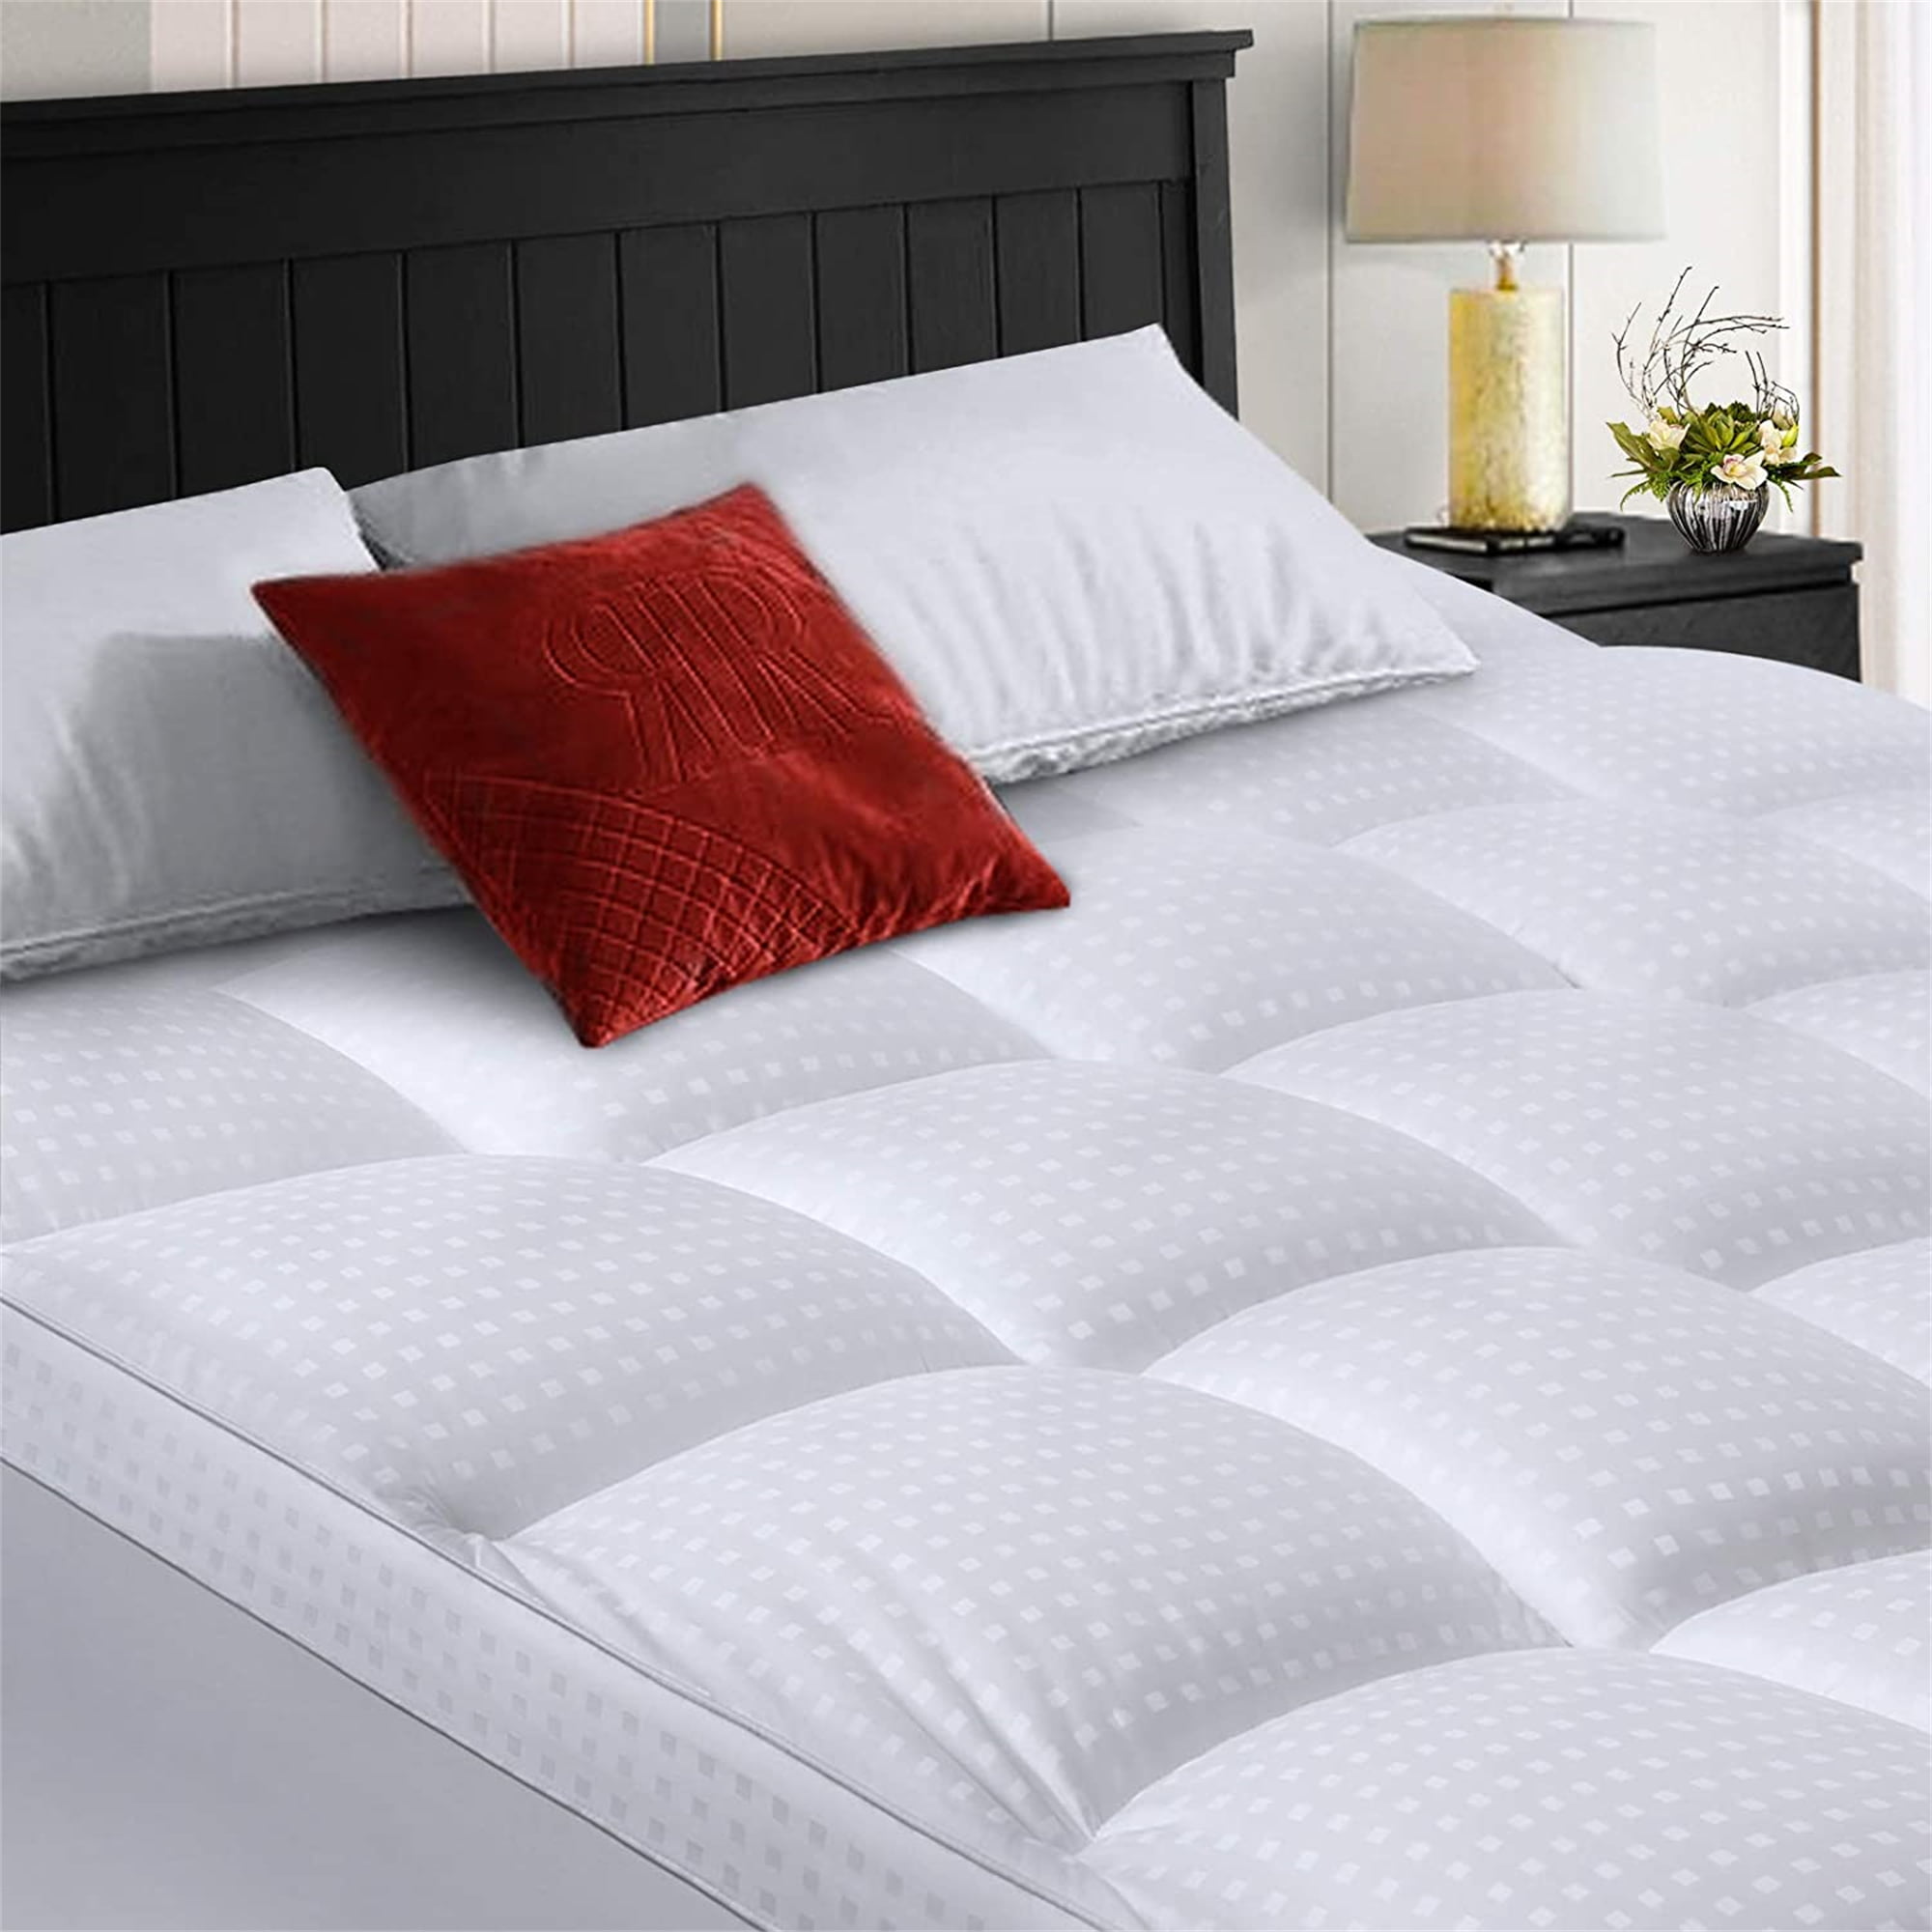 TEXARTIST King Mattress Pad Cover Cooling Mattress Topper 400 TC Cotton Pillow Top Mattress Cover Quilted Fitted Mattress Protector with 8-21 Inch Deep Pocket